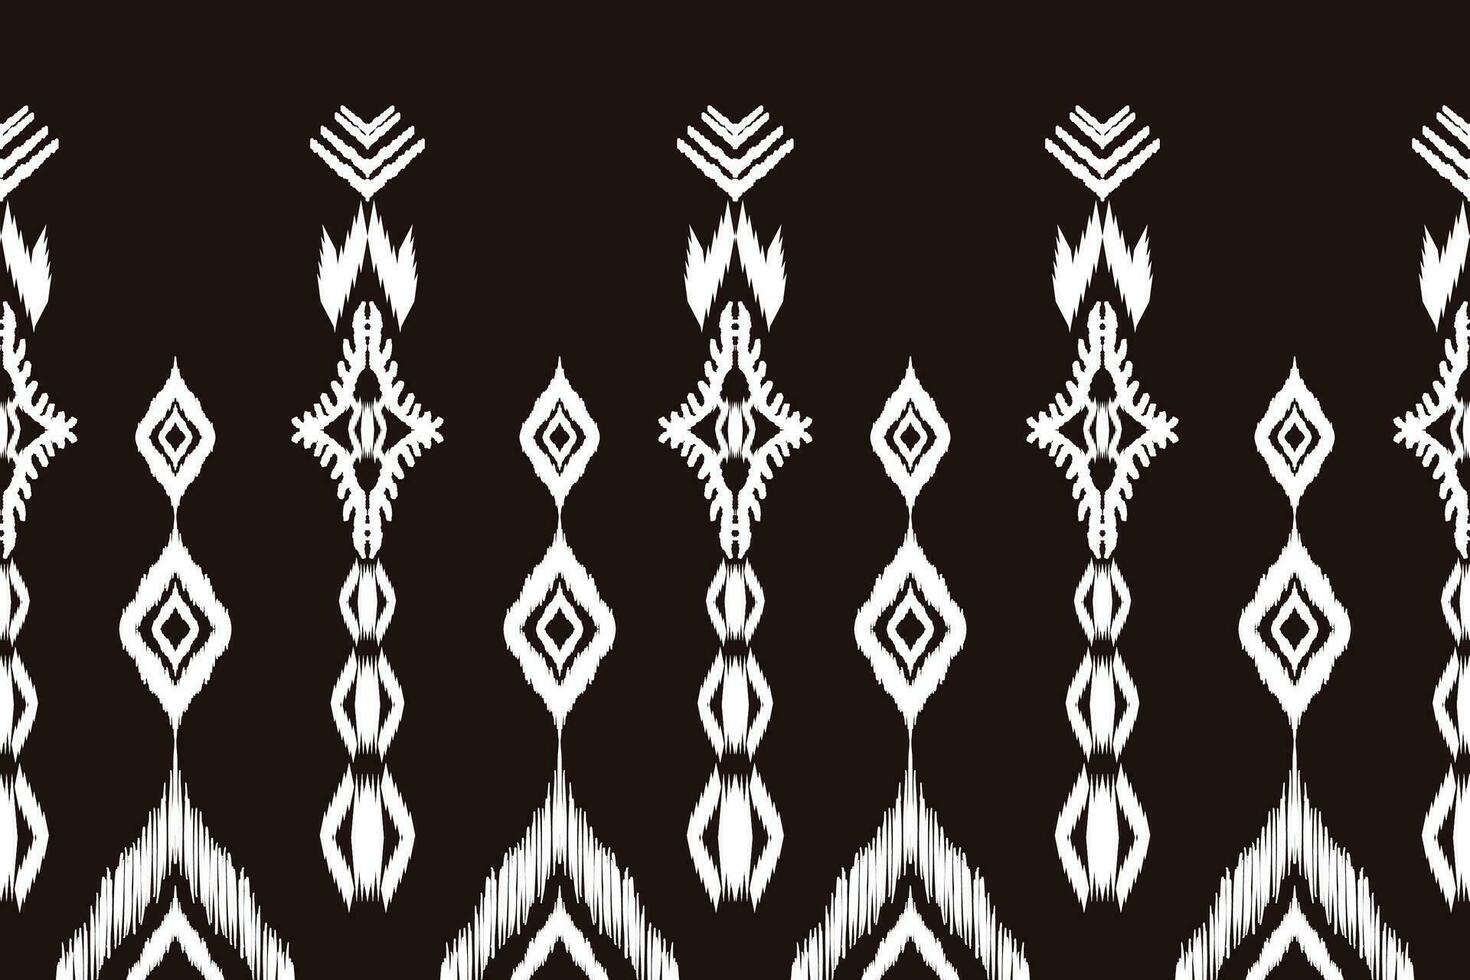 Ethnic ikat seamless pattern in tribal. Aztec geometric ethnic ornament print. Ikat pattern style. Design for background, wallpaper, illustration, fabric, clothing, carpet, textile, batik, embroidery. vector